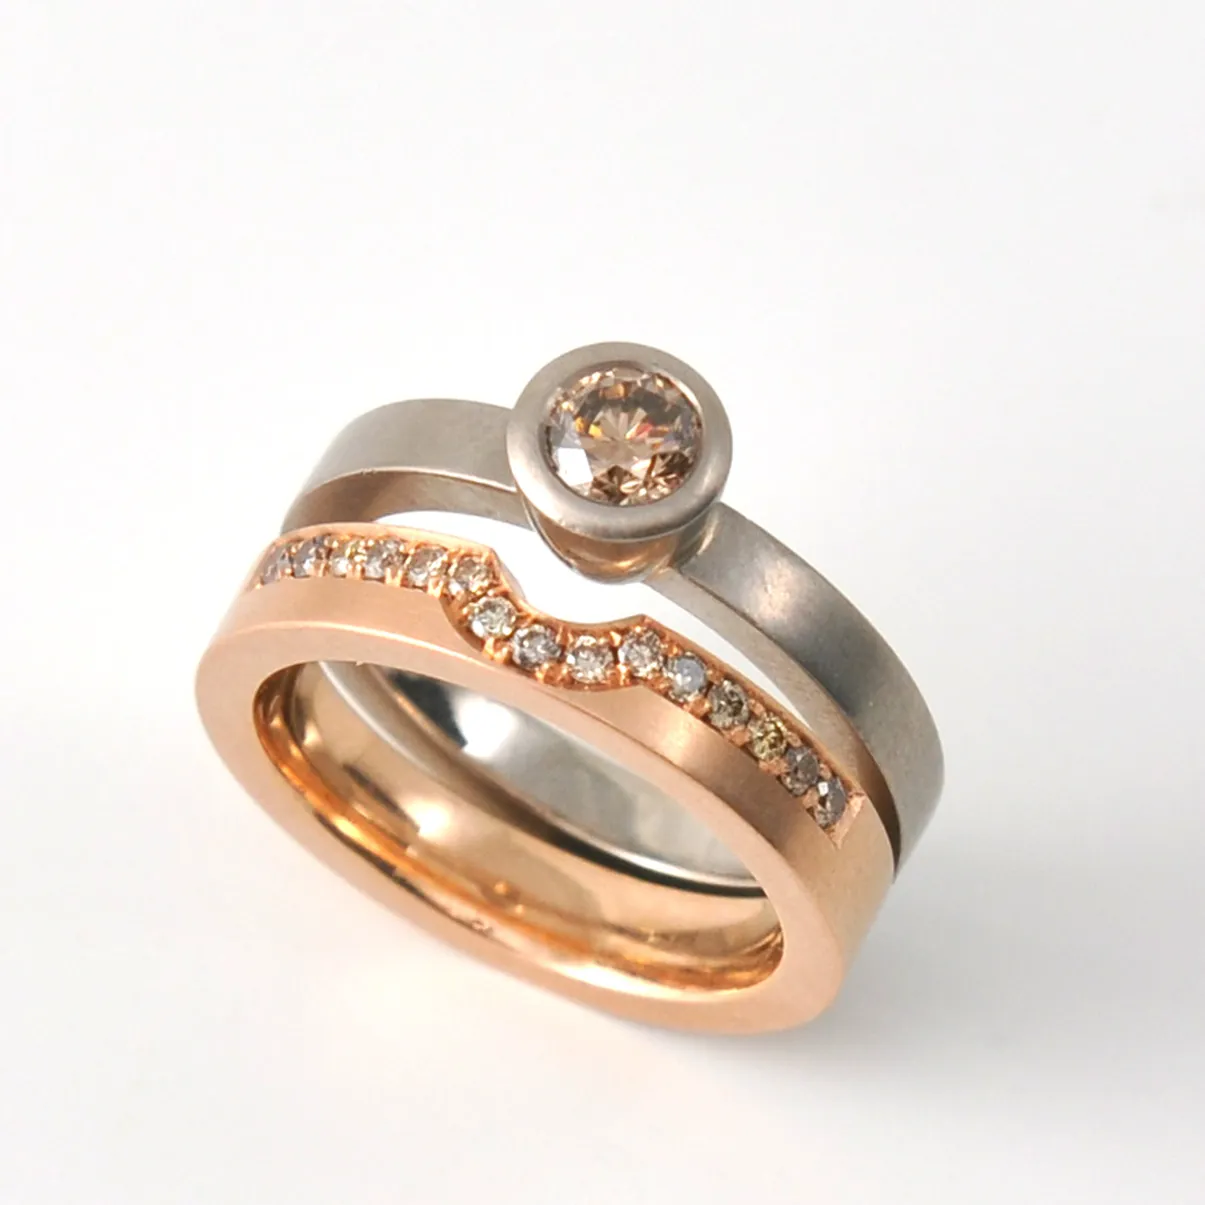 WG ring w. 0,37ct coffee dia. and rosé gold half set eternity